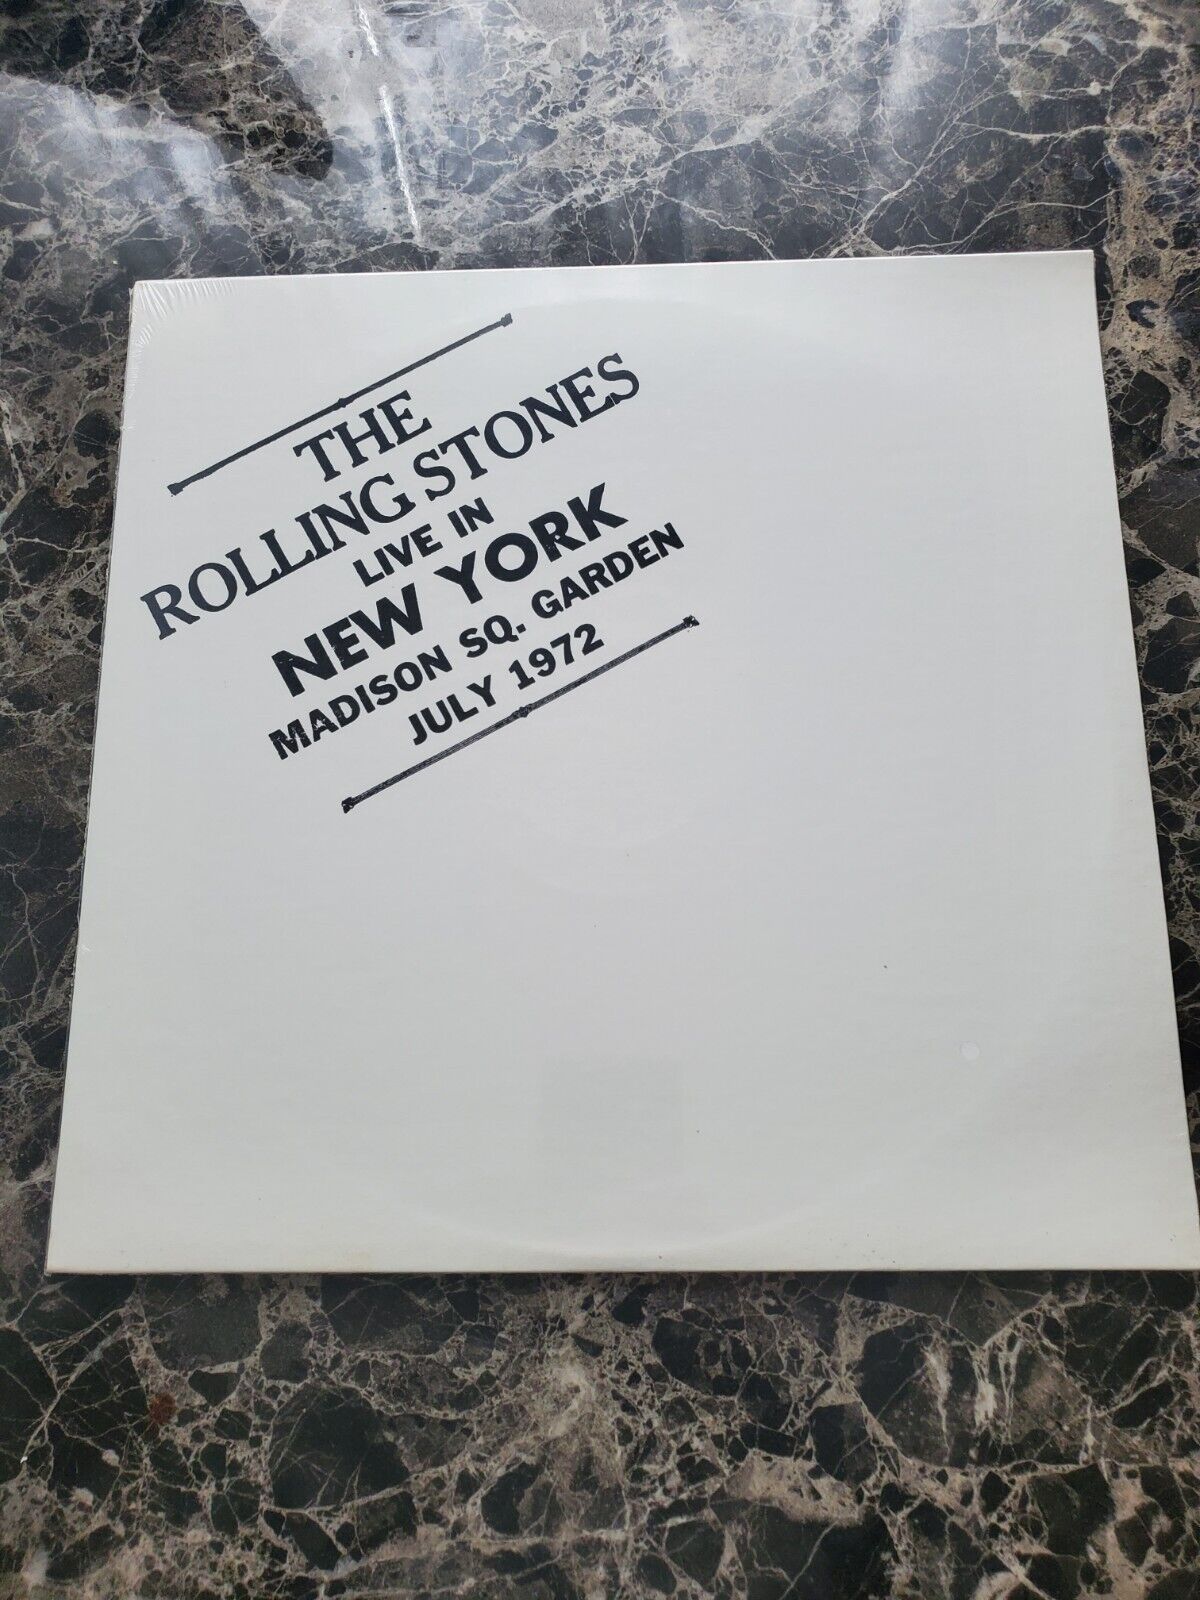 The Rolling Stones Vinyl Sealed never opened 